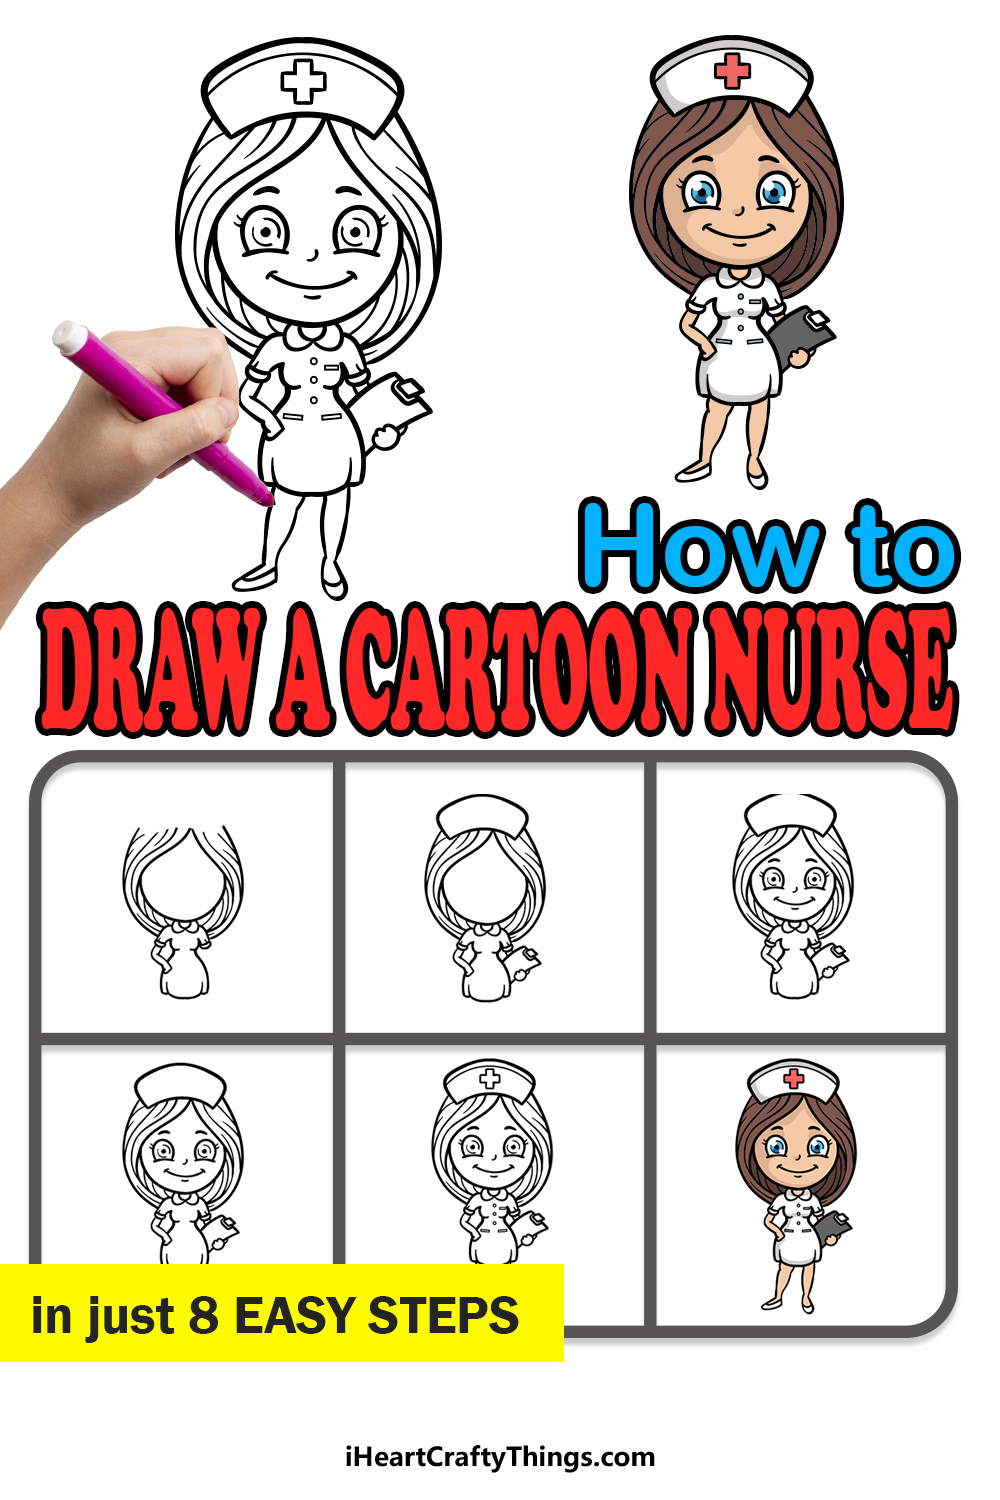 how to draw a cartoon nurse in 8 easy steps